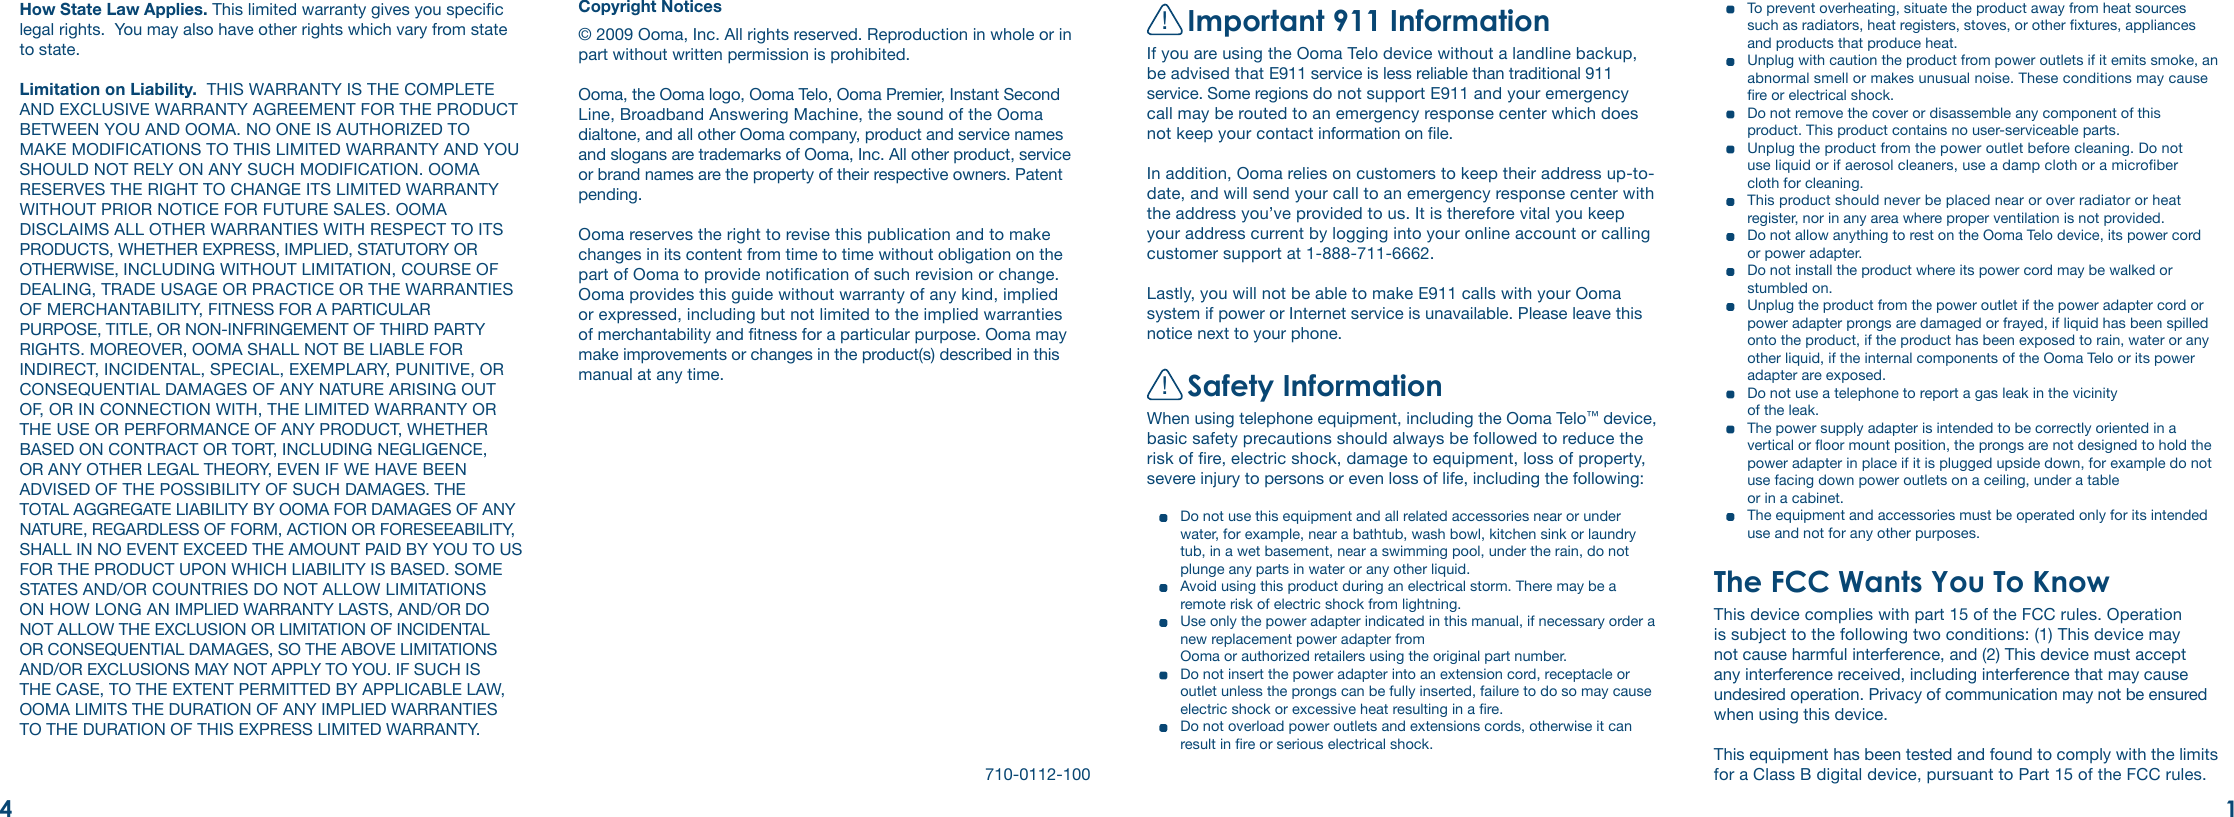 !Important 911 InformationIf you are using the Ooma Telo device without a landline backup, be advised that E911 service is less reliable than traditional 911 service. Some regions do not support E911 and your emergency call may be routed to an emergency response center which does not keep your contact information on le. In addition, Ooma relies on customers to keep their address up-to-date, and will send your call to an emergency response center with the address you’ve provided to us. It is therefore vital you keep your address current by logging into your online account or calling customer support at 1-888-711-6662. Lastly, you will not be able to make E911 calls with your Ooma system if power or Internet service is unavailable. Please leave this notice next to your phone.!Safety InformationWhen using telephone equipment, including the Ooma Telo™ device, basic safety precautions should always be followed to reduce the risk of re, electric shock, damage to equipment, loss of property, severe injury to persons or even loss of life, including the following:  Do not use this equipment and all related accessories near or under water, for example, near a bathtub, wash bowl, kitchen sink or laundry tub, in a wet basement, near a swimming pool, under the rain, do not plunge any parts in water or any other liquid.   Avoid using this product during an electrical storm. There may be a remote risk of electric shock from lightning.   Use only the power adapter indicated in this manual, if necessary order a new replacement power adapter from  Ooma or authorized retailers using the original part number.   Do not insert the power adapter into an extension cord, receptacle or outlet unless the prongs can be fully inserted, failure to do so may cause electric shock or excessive heat resulting in a re.  Do not overload power outlets and extensions cords, otherwise it can result in re or serious electrical shock.How State Law Applies. This limited warranty gives you specic legal rights.  You may also have other rights which vary from state to state.Limitation on Liability.  THIS WARRANTY IS THE COMPLETE AND EXCLUSIVE WARRANTY AGREEMENT FOR THE PRODUCT BETWEEN YOU AND OOMA. NO ONE IS AUTHORIZED TO MAKE MODIFICATIONS TO THIS LIMITED WARRANTY AND YOU SHOULD NOT RELY ON ANY SUCH MODIFICATION. OOMA RESERVES THE RIGHT TO CHANGE ITS LIMITED WARRANTY WITHOUT PRIOR NOTICE FOR FUTURE SALES. OOMA DISCLAIMS ALL OTHER WARRANTIES WITH RESPECT TO ITS PRODUCTS, WHETHER EXPRESS, IMPLIED, STATUTORY OR OTHERWISE, INCLUDING WITHOUT LIMITATION, COURSE OF DEALING, TRADE USAGE OR PRACTICE OR THE WARRANTIES OF MERCHANTABILITY, FITNESS FOR A PARTICULAR PURPOSE, TITLE, OR NON-INFRINGEMENT OF THIRD PARTY RIGHTS. MOREOVER, OOMA SHALL NOT BE LIABLE FOR INDIRECT, INCIDENTAL, SPECIAL, EXEMPLARY, PUNITIVE, OR CONSEQUENTIAL DAMAGES OF ANY NATURE ARISING OUT OF, OR IN CONNECTION WITH, THE LIMITED WARRANTY OR THE USE OR PERFORMANCE OF ANY PRODUCT, WHETHER BASED ON CONTRACT OR TORT, INCLUDING NEGLIGENCE, OR ANY OTHER LEGAL THEORY, EVEN IF WE HAVE BEEN ADVISED OF THE POSSIBILITY OF SUCH DAMAGES. THE TOTAL AGGREGATE LIABILITY BY OOMA FOR DAMAGES OF ANY NATURE, REGARDLESS OF FORM, ACTION OR FORESEEABILITY, SHALL IN NO EVENT EXCEED THE AMOUNT PAID BY YOU TO US FOR THE PRODUCT UPON WHICH LIABILITY IS BASED. SOME STATES AND/OR COUNTRIES DO NOT ALLOW LIMITATIONS ON HOW LONG AN IMPLIED WARRANTY LASTS, AND/OR DO NOT ALLOW THE EXCLUSION OR LIMITATION OF INCIDENTAL OR CONSEQUENTIAL DAMAGES, SO THE ABOVE LIMITATIONS AND/OR EXCLUSIONS MAY NOT APPLY TO YOU. IF SUCH IS THE CASE, TO THE EXTENT PERMITTED BY APPLICABLE LAW, OOMA LIMITS THE DURATION OF ANY IMPLIED WARRANTIES TO THE DURATION OF THIS EXPRESS LIMITED WARRANTY.  To prevent overheating, situate the product away from heat sources such as radiators, heat registers, stoves, or other xtures, appliances and products that produce heat.   Unplug with caution the product from power outlets if it emits smoke, an abnormal smell or makes unusual noise. These conditions may cause re or electrical shock.   Do not remove the cover or disassemble any component of this product. This product contains no user-serviceable parts.   Unplug the product from the power outlet before cleaning. Do not  use liquid or if aerosol cleaners, use a damp cloth or a microber  cloth for cleaning.   This product should never be placed near or over radiator or heat register, nor in any area where proper ventilation is not provided.   Do not allow anything to rest on the Ooma Telo device, its power cord  or power adapter.   Do not install the product where its power cord may be walked or stumbled on.  Unplug the product from the power outlet if the power adapter cord or power adapter prongs are damaged or frayed, if liquid has been spilled onto the product, if the product has been exposed to rain, water or any other liquid, if the internal components of the Ooma Telo or its power adapter are exposed.   Do not use a telephone to report a gas leak in the vicinity  of the leak.   The power supply adapter is intended to be correctly oriented in a vertical or oor mount position, the prongs are not designed to hold the power adapter in place if it is plugged upside down, for example do not use facing down power outlets on a ceiling, under a table  or in a cabinet.   The equipment and accessories must be operated only for its intended use and not for any other purposes.The FCC Wants You To KnowThis device complies with part 15 of the FCC rules. Operation is subject to the following two conditions: (1) This device may not cause harmful interference, and (2) This device must accept any interference received, including interference that may cause undesired operation. Privacy of communication may not be ensured when using this device.This equipment has been tested and found to comply with the limits for a Class B digital device, pursuant to Part 15 of the FCC rules. Copyright Notices© 2009 Ooma, Inc. All rights reserved. Reproduction in whole or in part without written permission is prohibited.Ooma, the Ooma logo, Ooma Telo, Ooma Premier, Instant Second Line, Broadband Answering Machine, the sound of the Ooma dialtone, and all other Ooma company, product and service names and slogans are trademarks of Ooma, Inc. All other product, service or brand names are the property of their respective owners. Patent pending.  Ooma reserves the right to revise this publication and to make changes in its content from time to time without obligation on the part of Ooma to provide notication of such revision or change. Ooma provides this guide without warranty of any kind, implied or expressed, including but not limited to the implied warranties of merchantability and tness for a particular purpose. Ooma may make improvements or changes in the product(s) described in this manual at any time.710-0112-10014